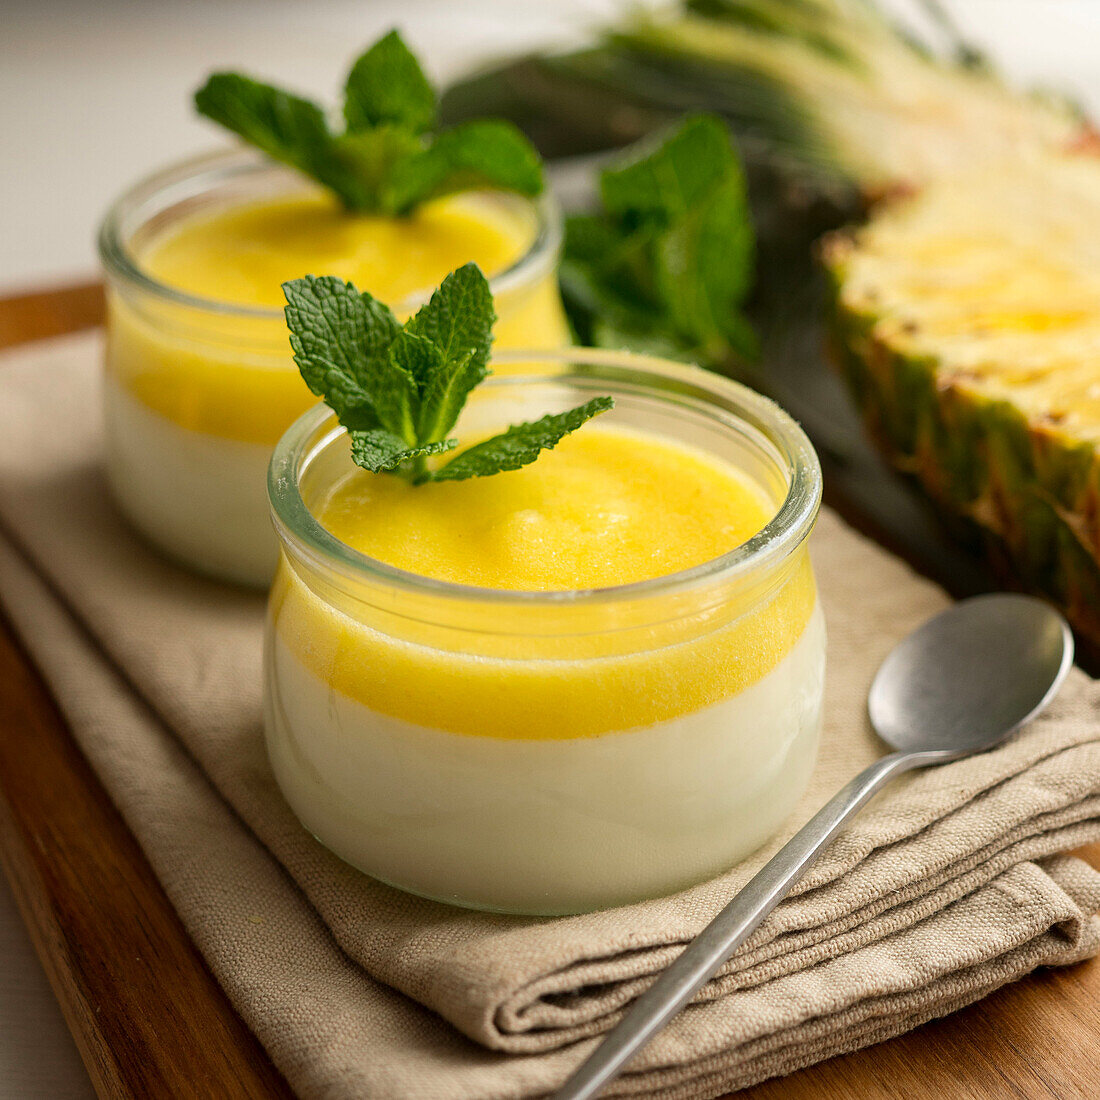 Panna cotta with pineapple puree and mint